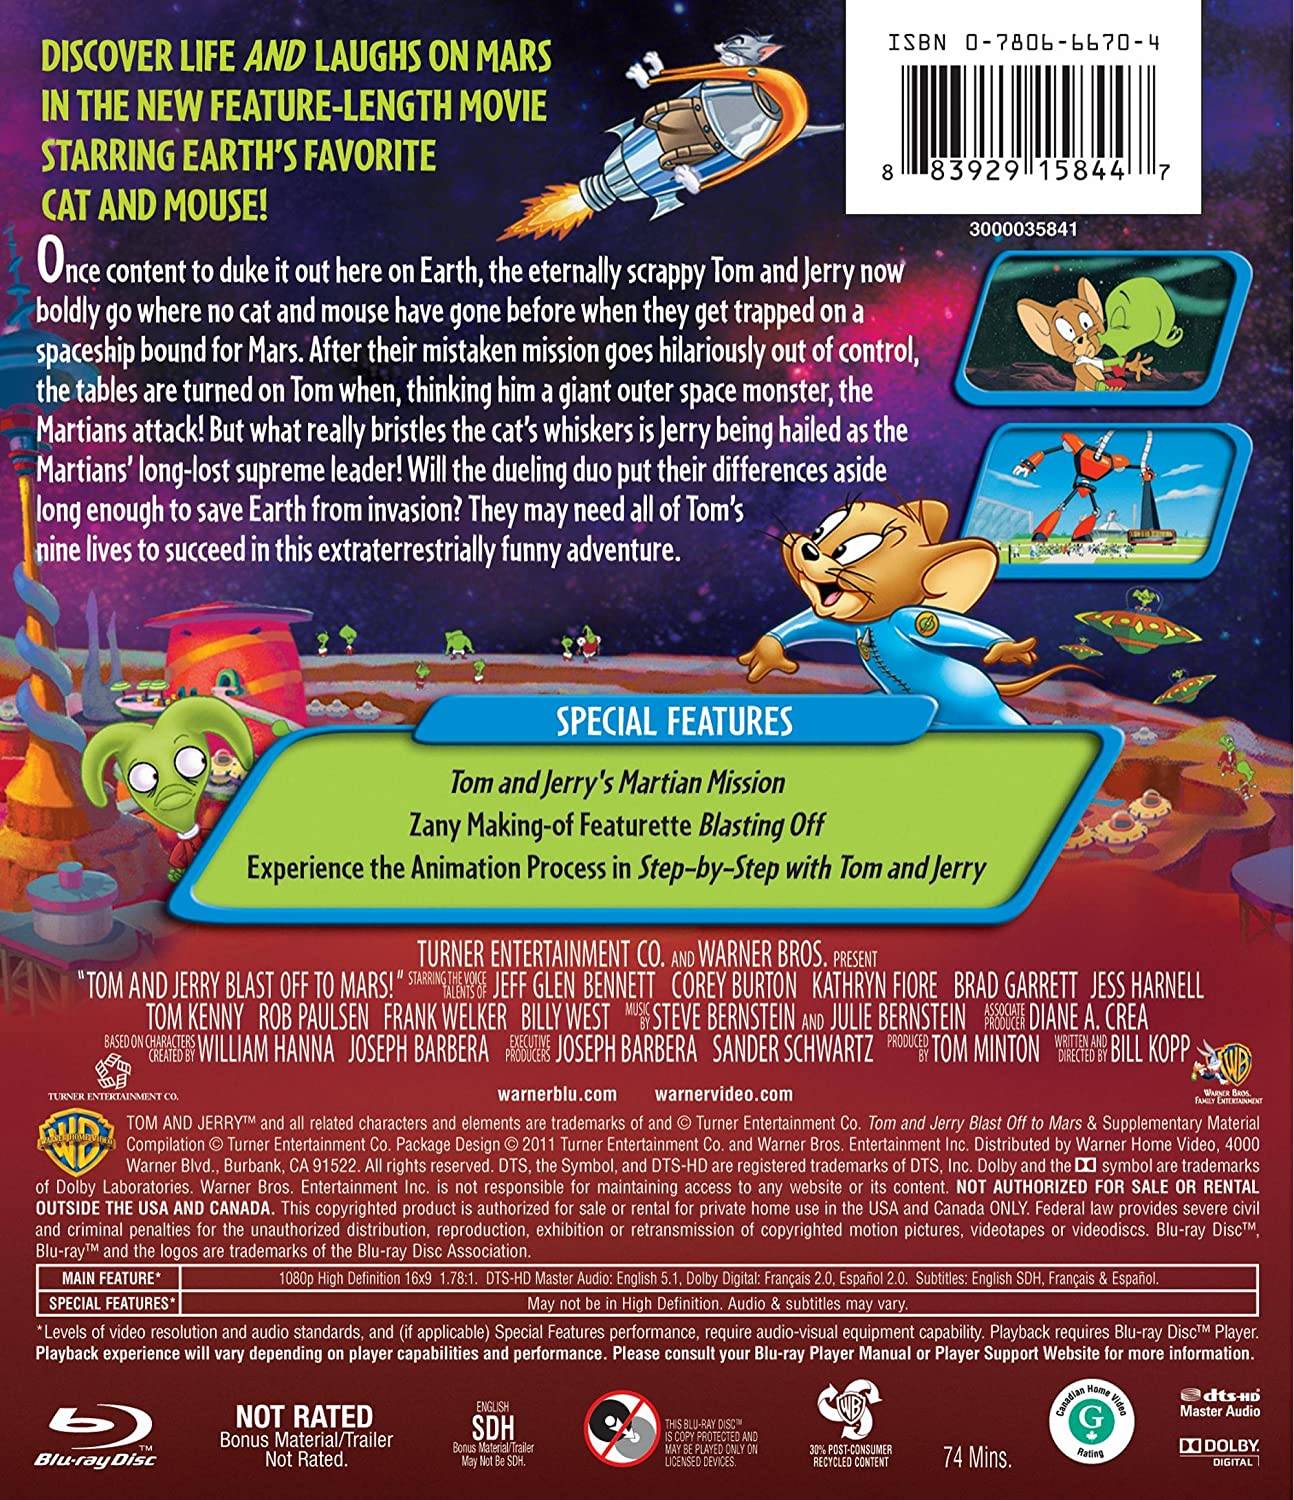 Tom And Jerry Movie Blast Off To Mars Le Cinema Paradiso Blu Ray Reviews And Dvd Reviews